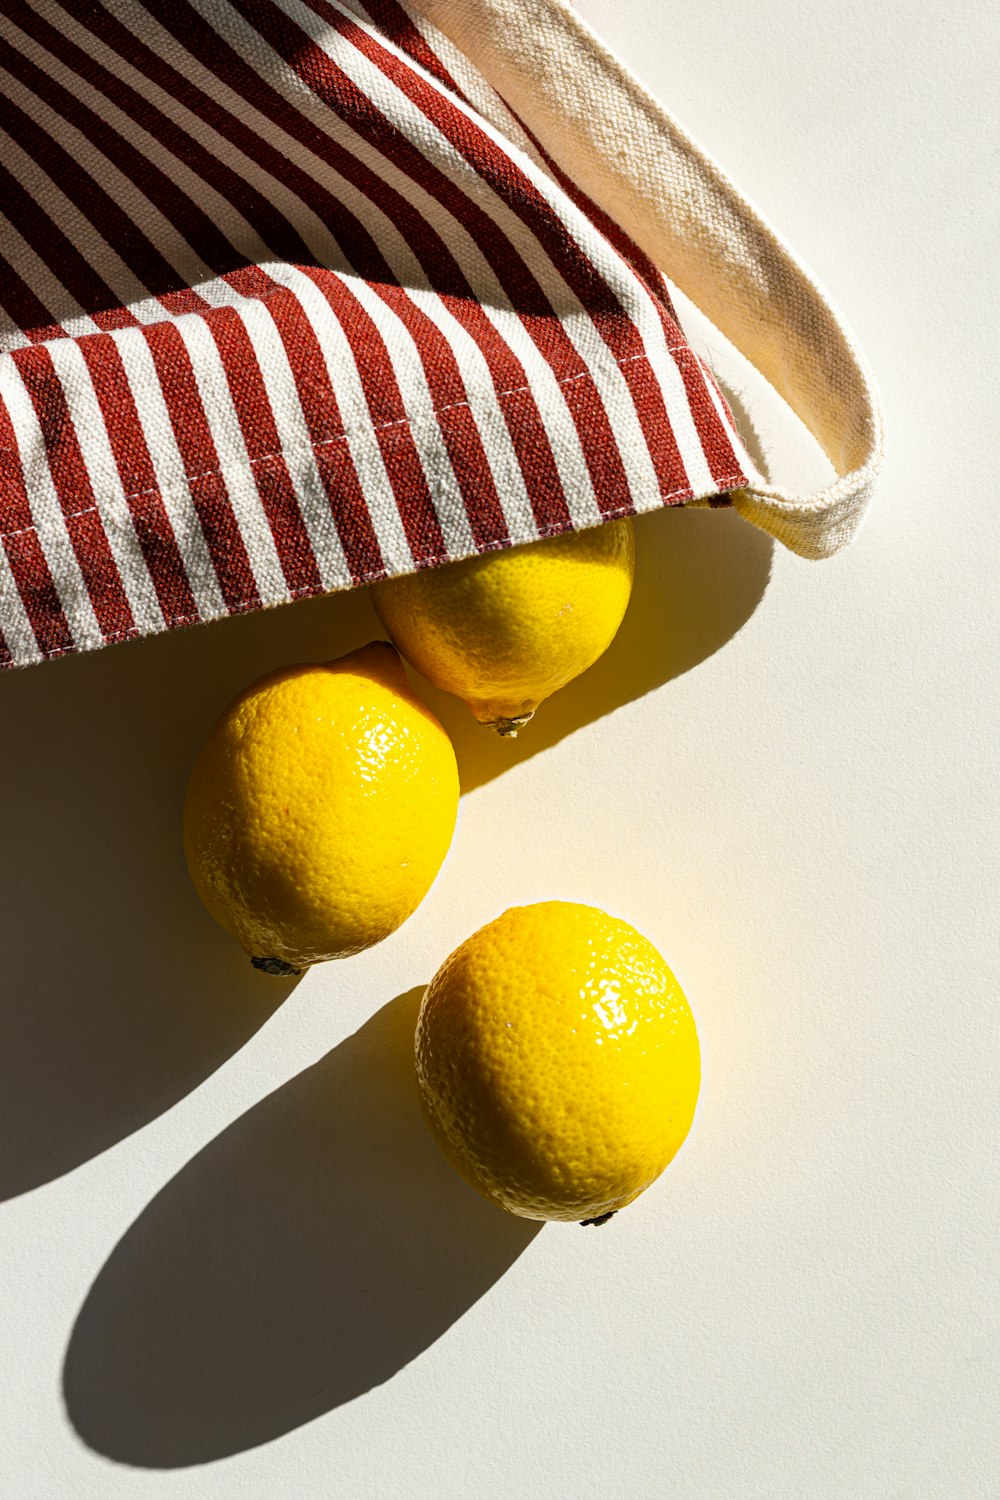 three lemons in a red and white striped bag